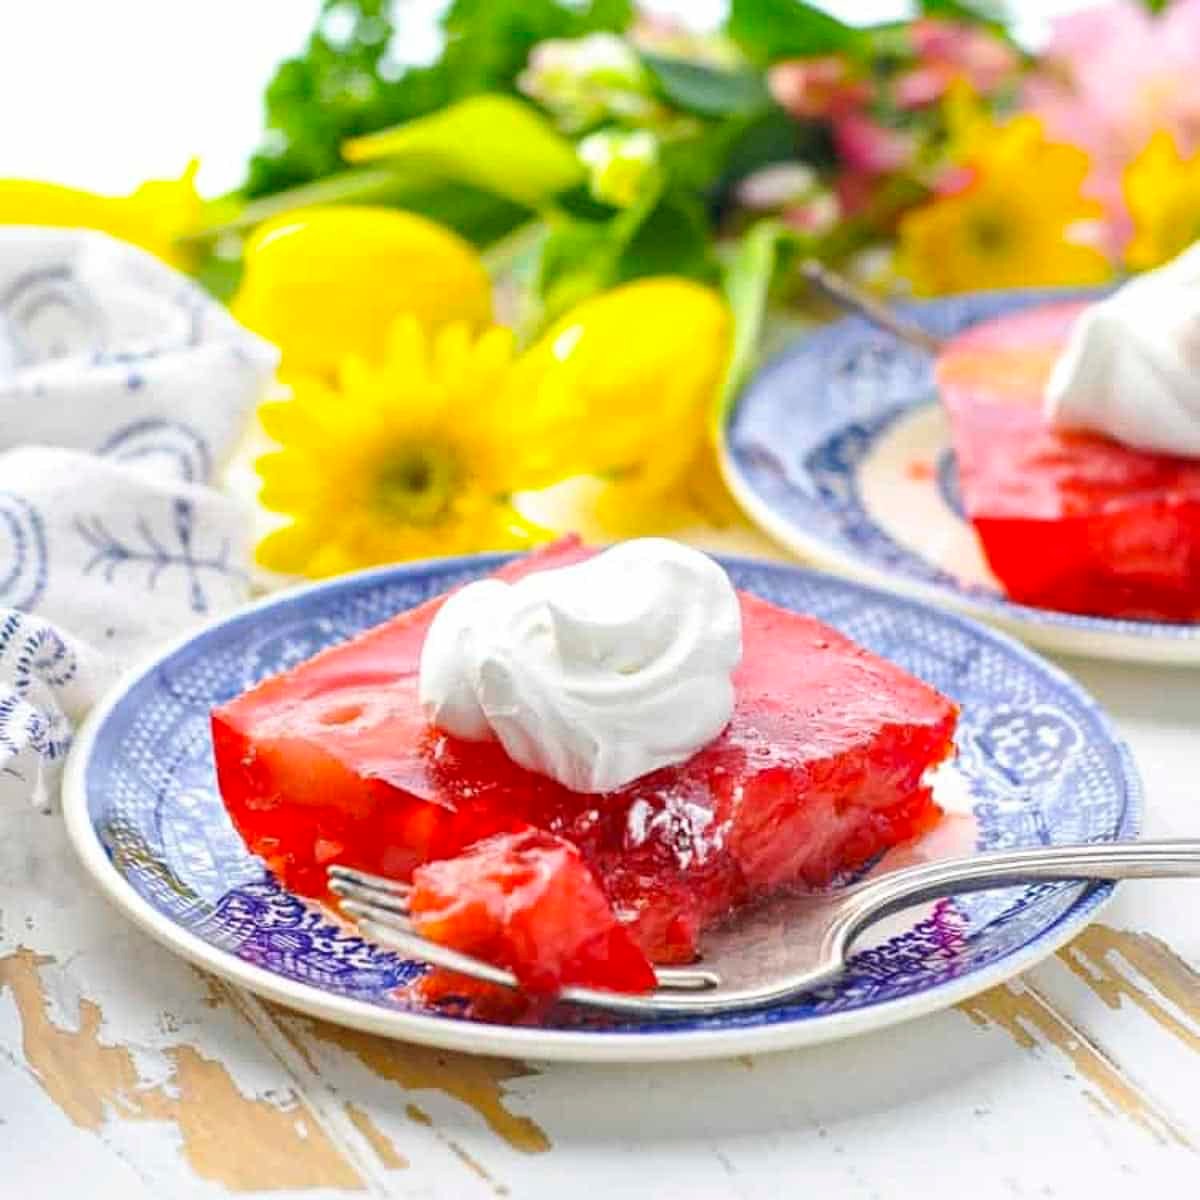 Square side shot of a slice of strawberry jello salad with cool whip on top.